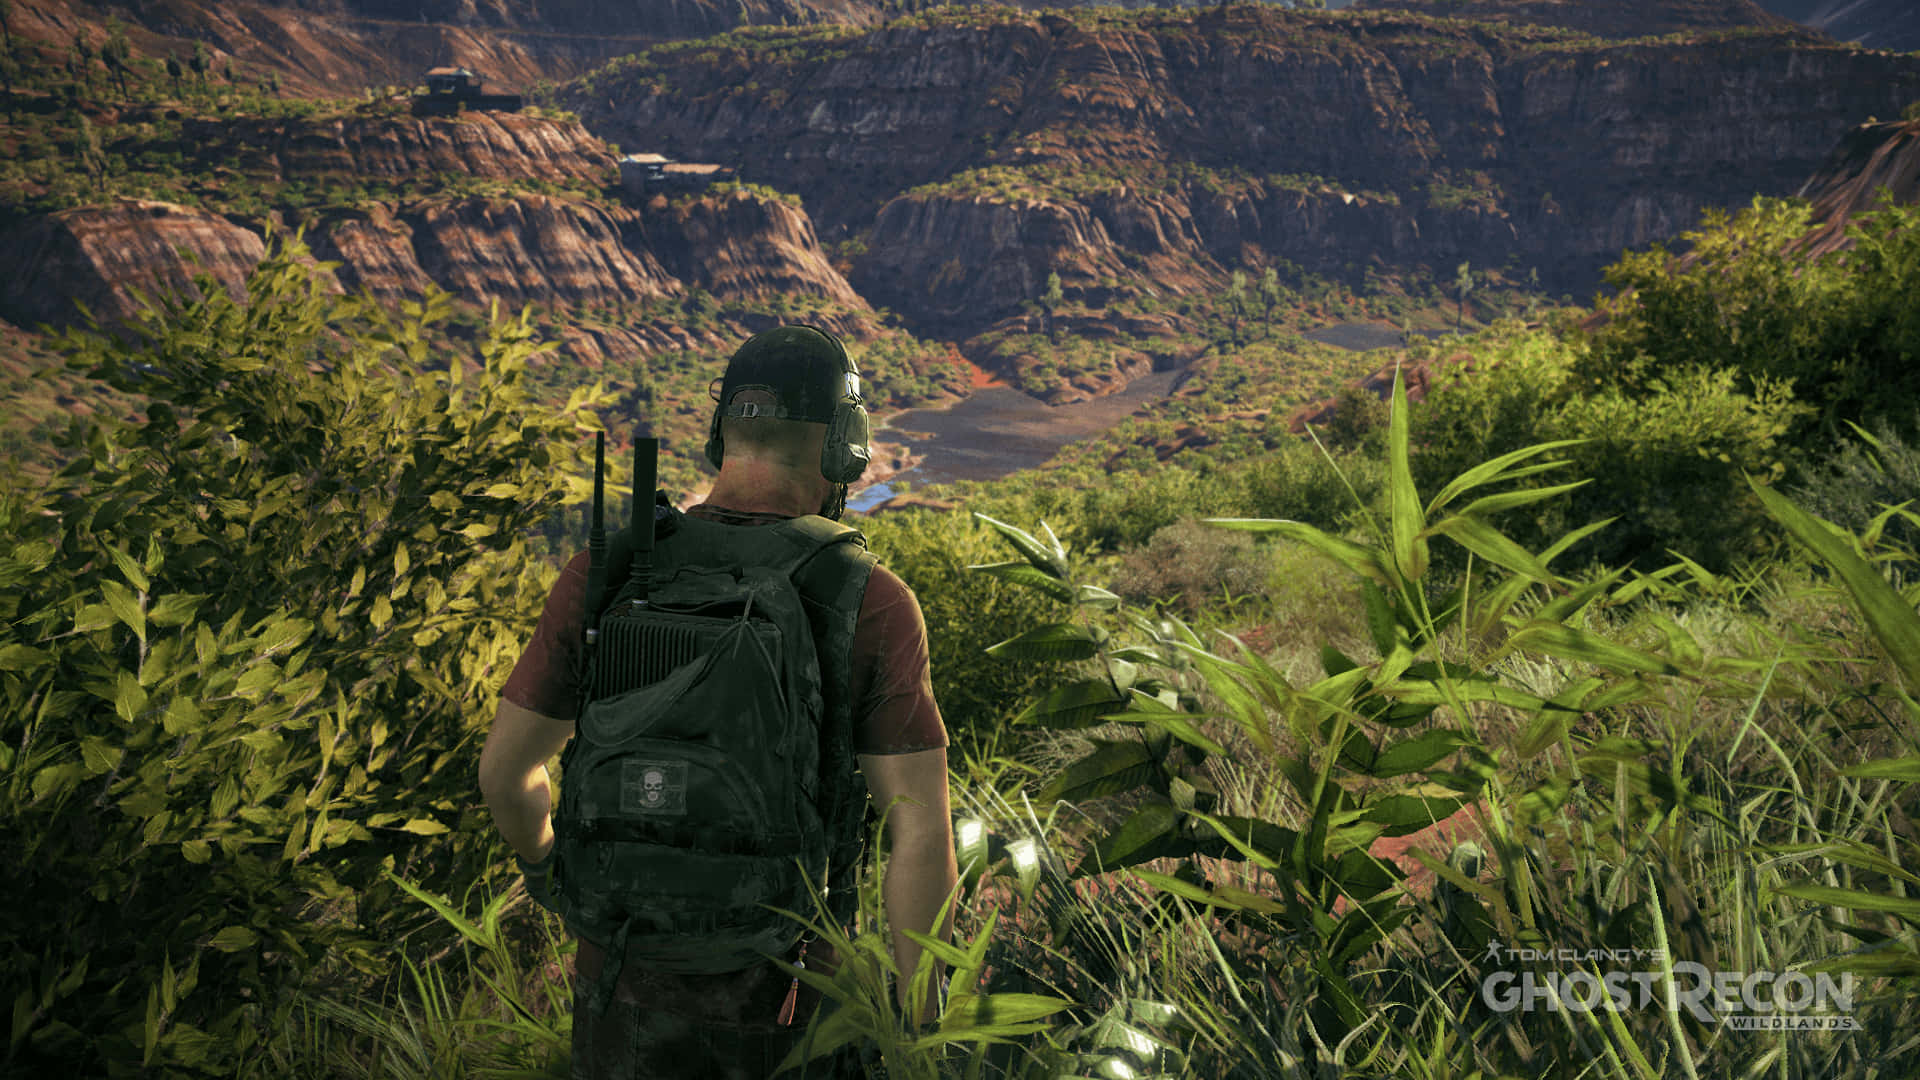 Experience an epic adventure as a part of the best Ghost Recon Wildlands team